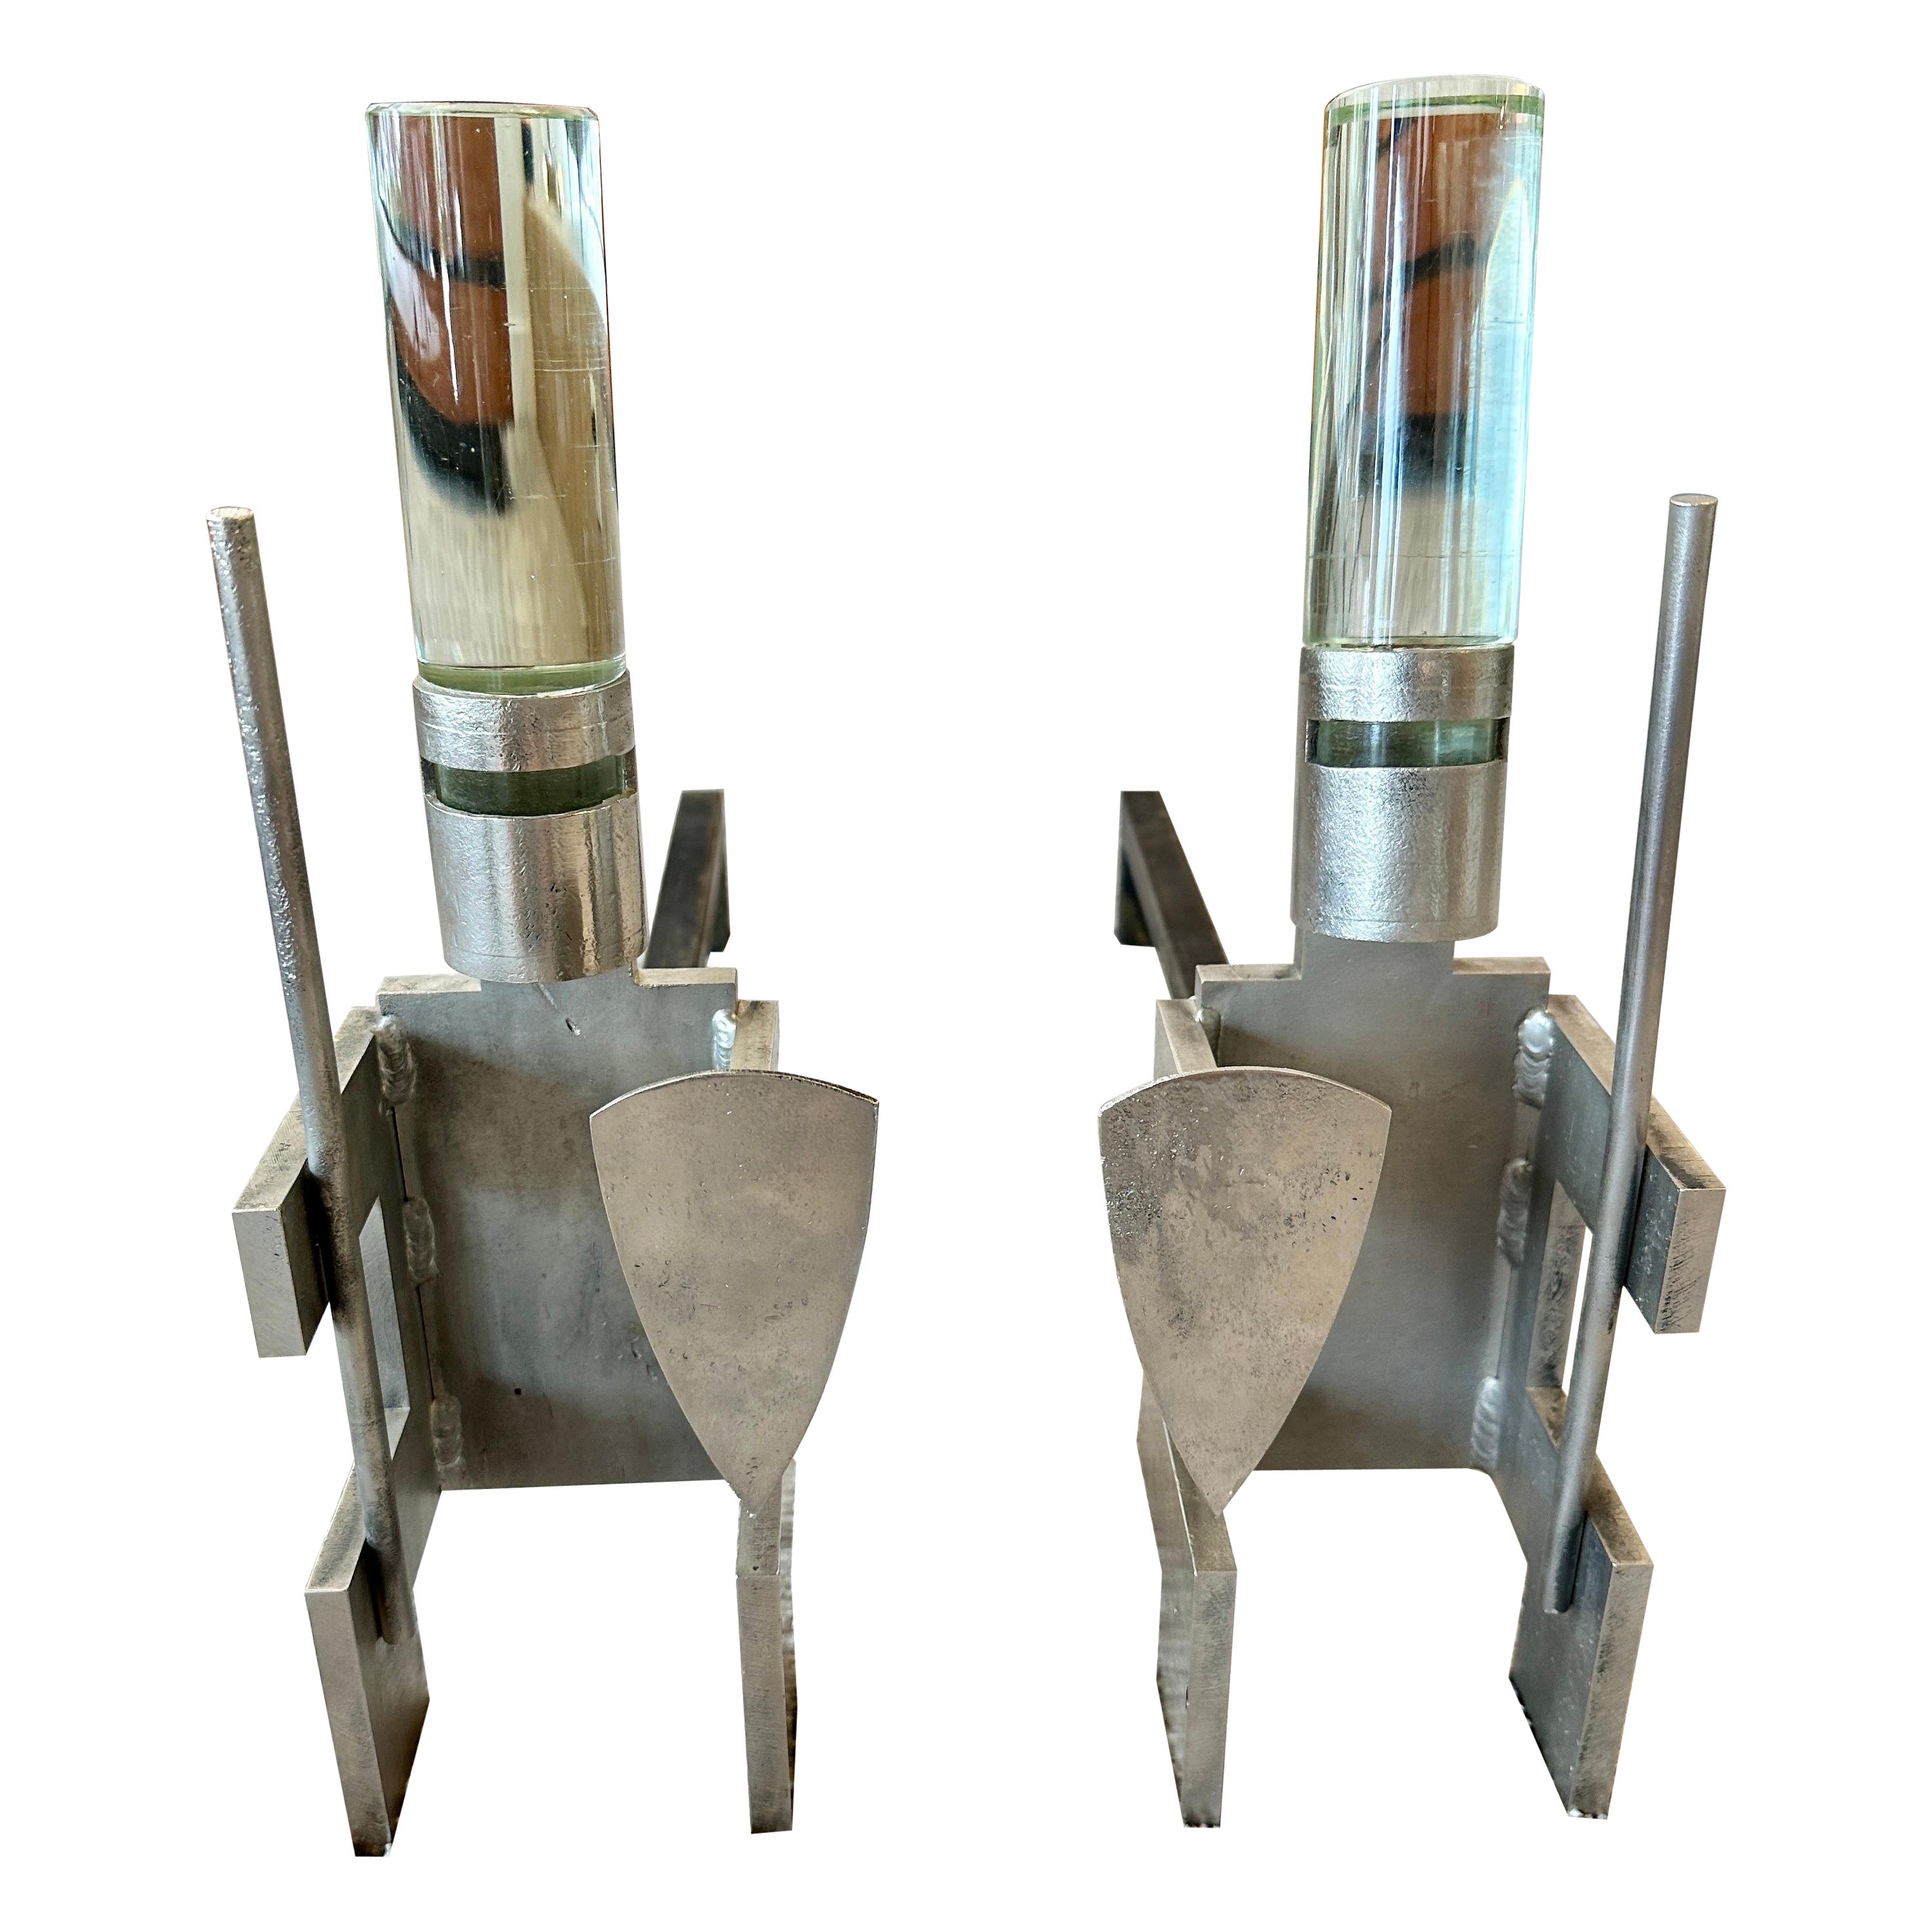 Pair of Andirons in Chrome, Enameled Steel & Glass, Designed as Knights